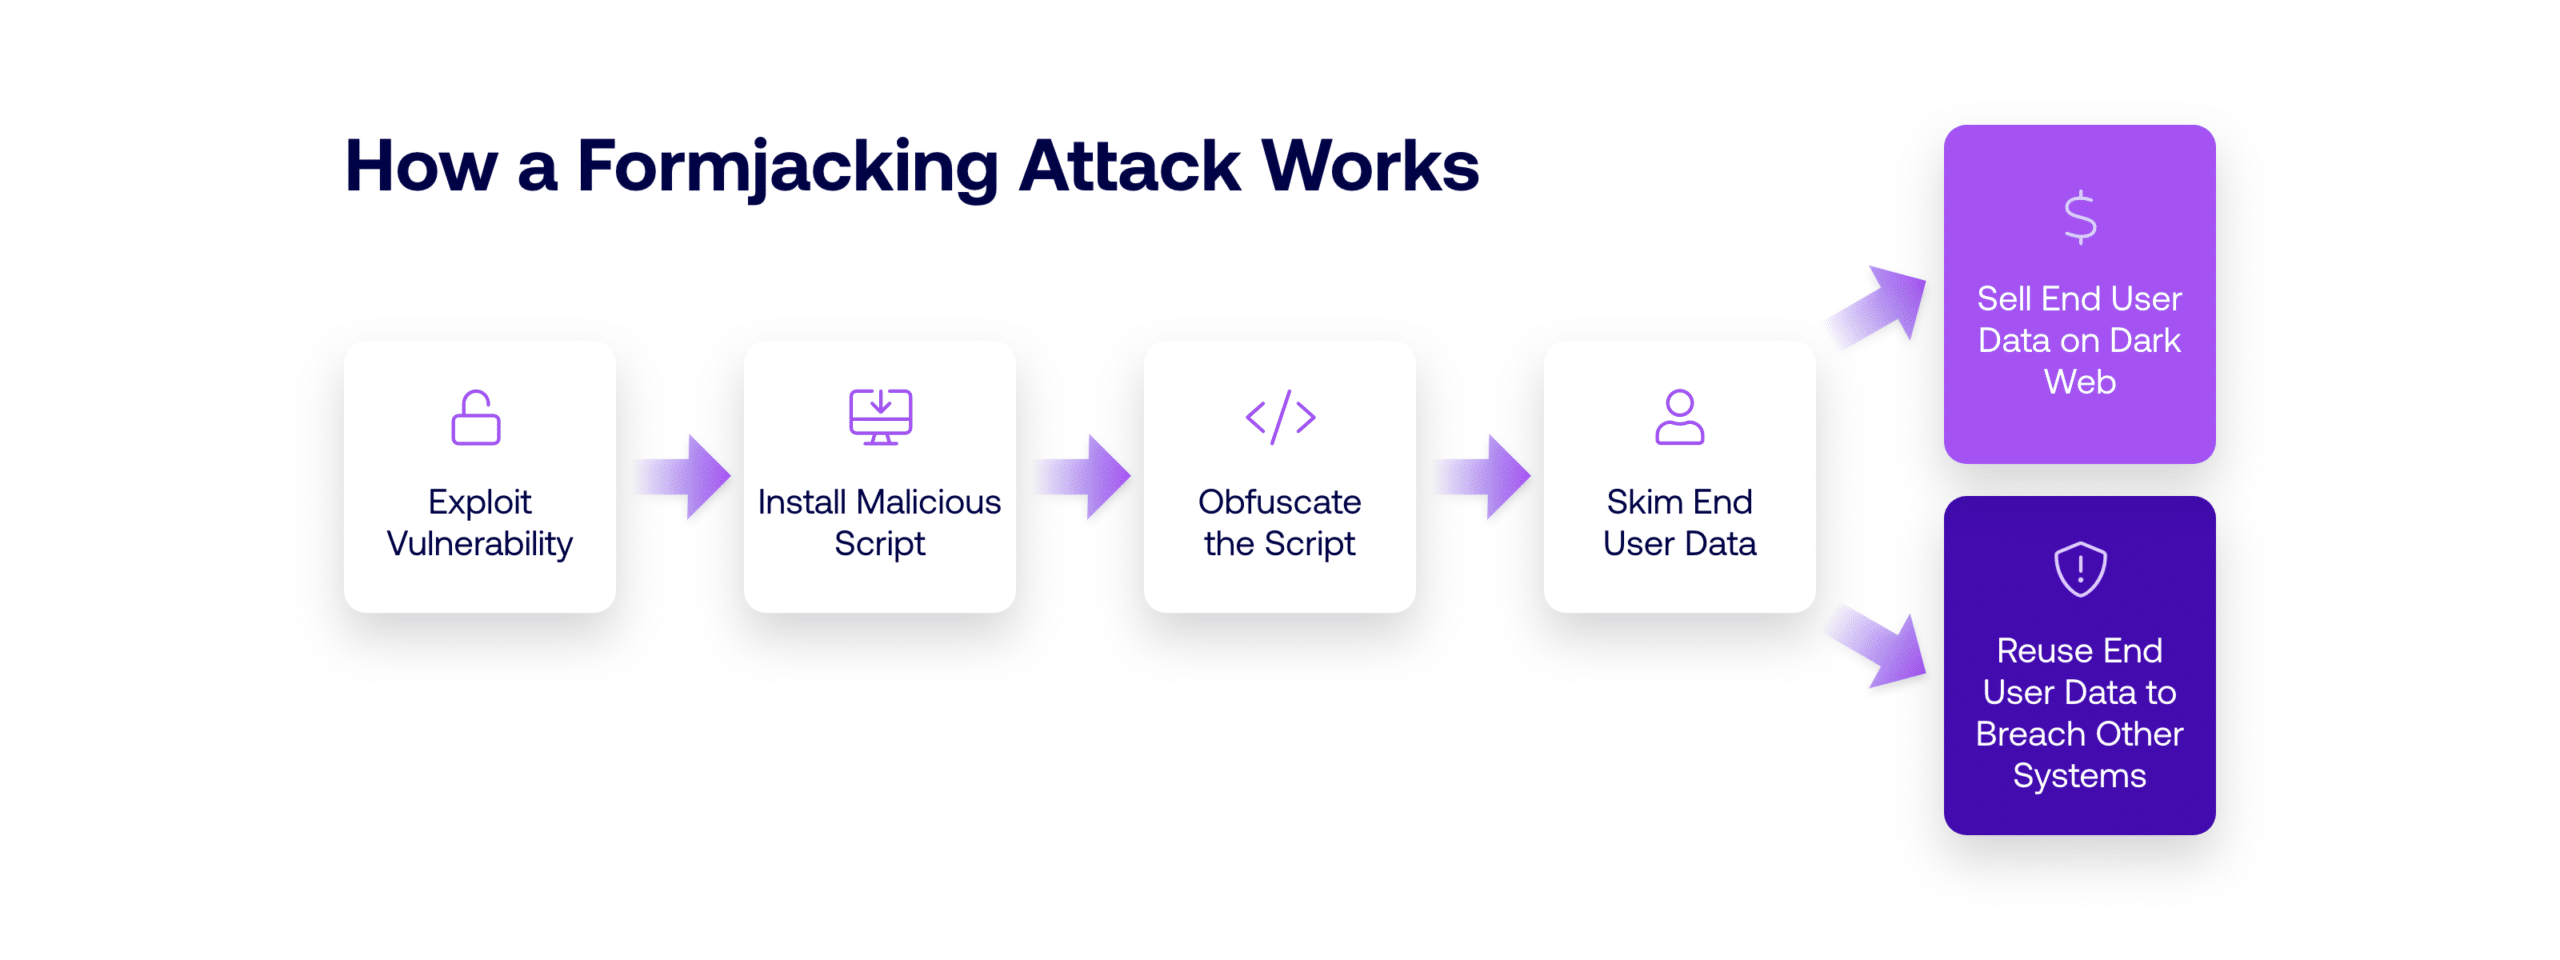 how a formjacking attack works